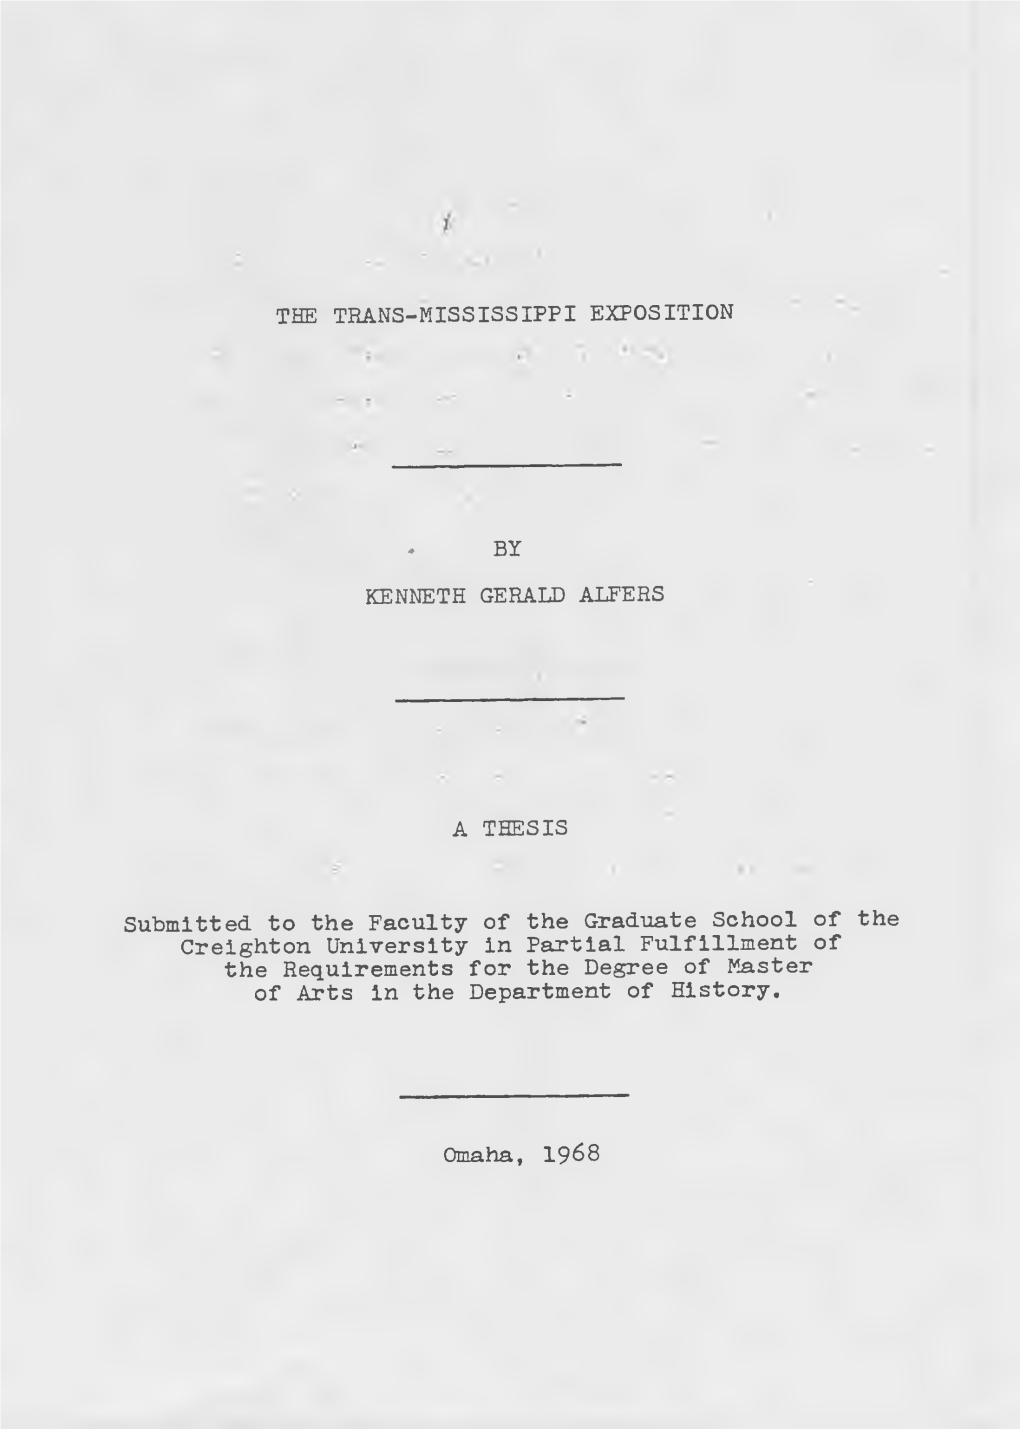 THE TRANS-MISSISSIPPI EXPOSITION . by KENNETH GERALD ALFERS a THESIS Submitted to the Faculty of the Graduate School of the Crei